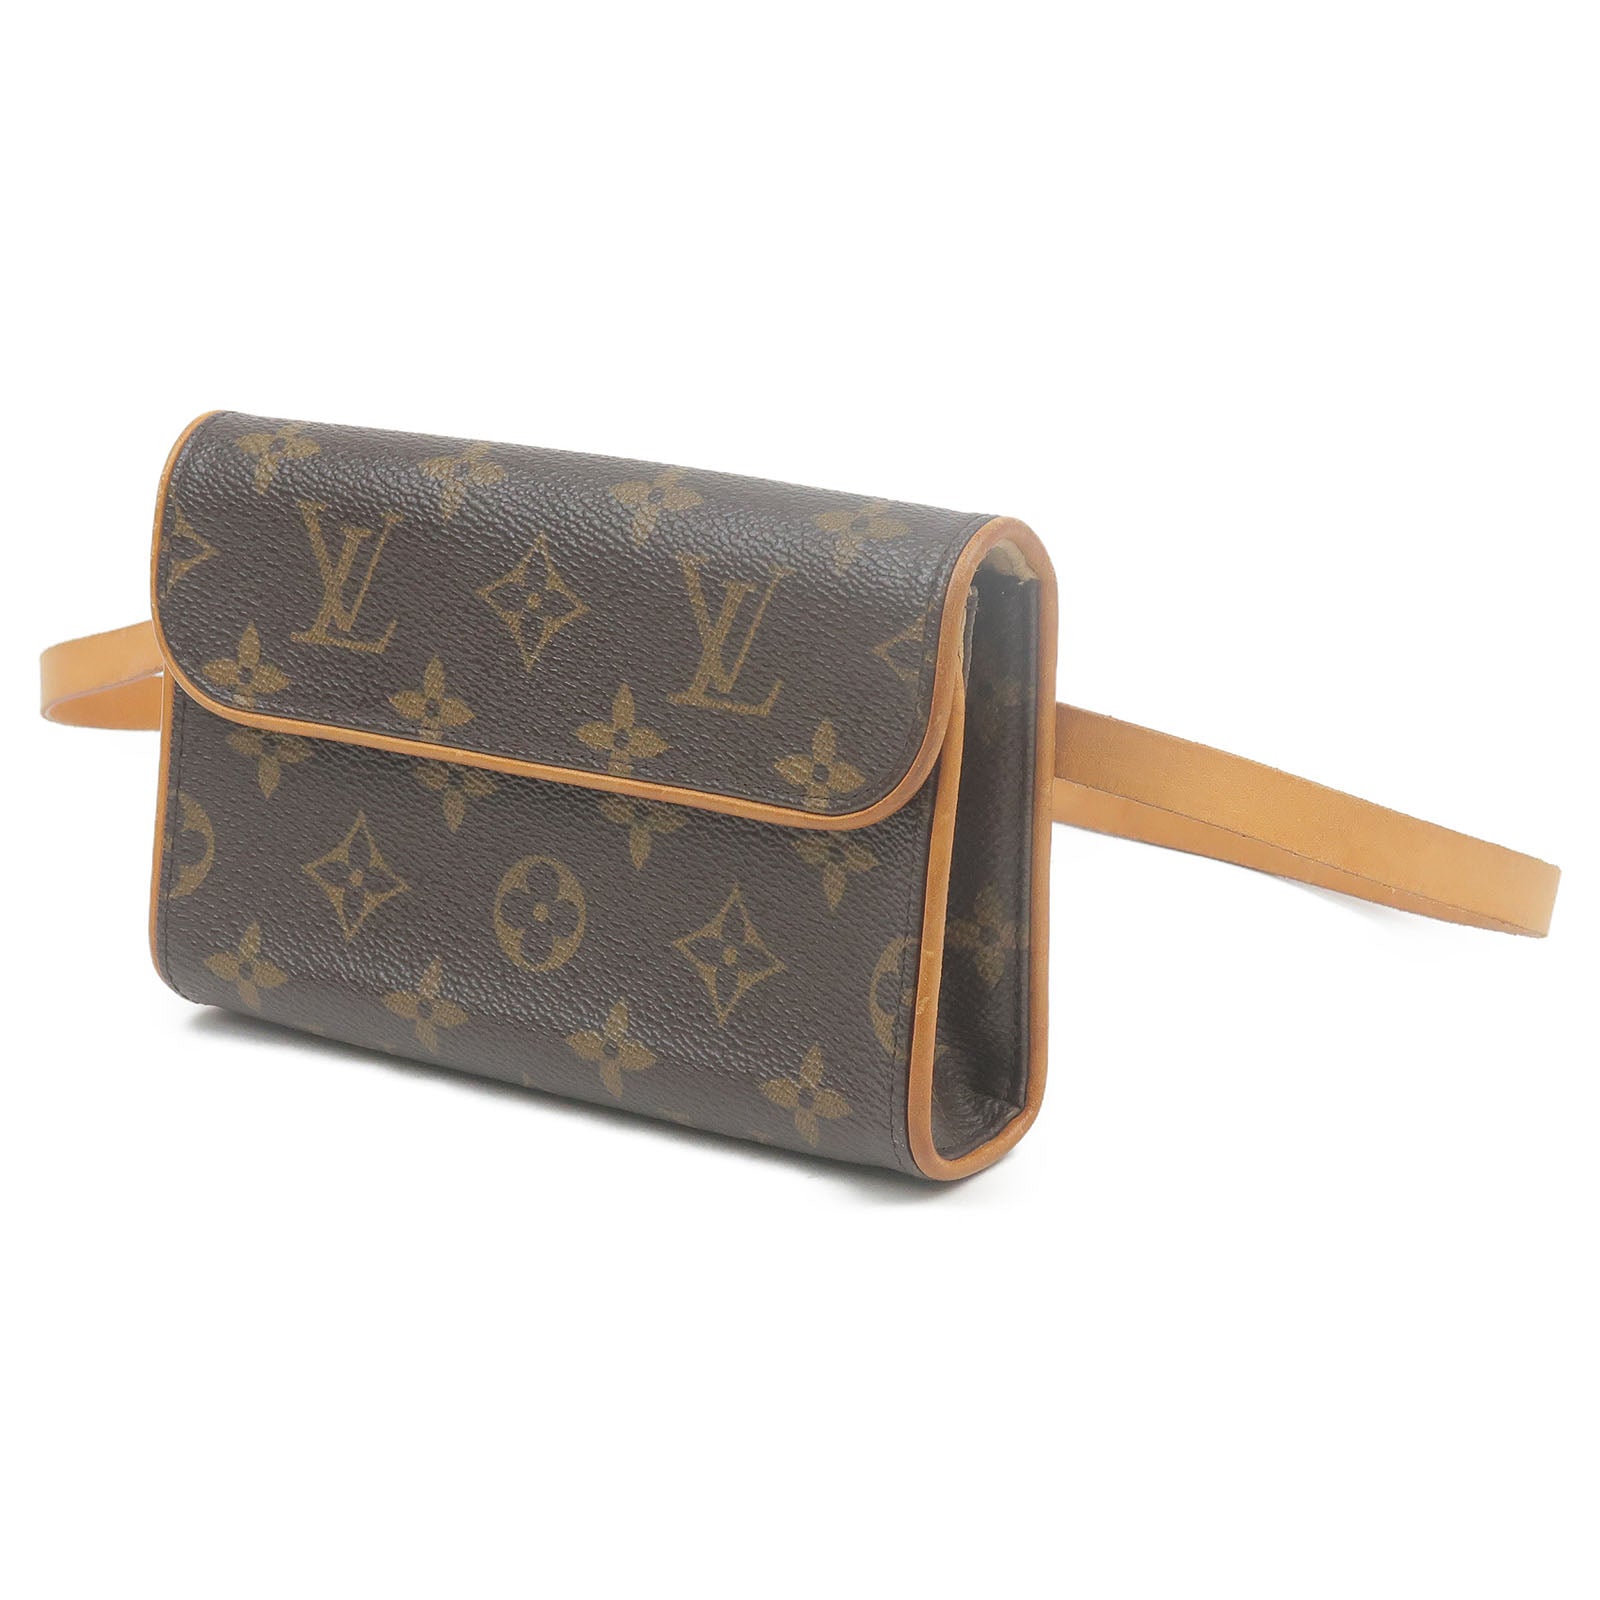 Louis Vuitton, Bags, Louis Vuitton Bum Bag Or Crossbody Florentine Pouch  Bag With Strap And